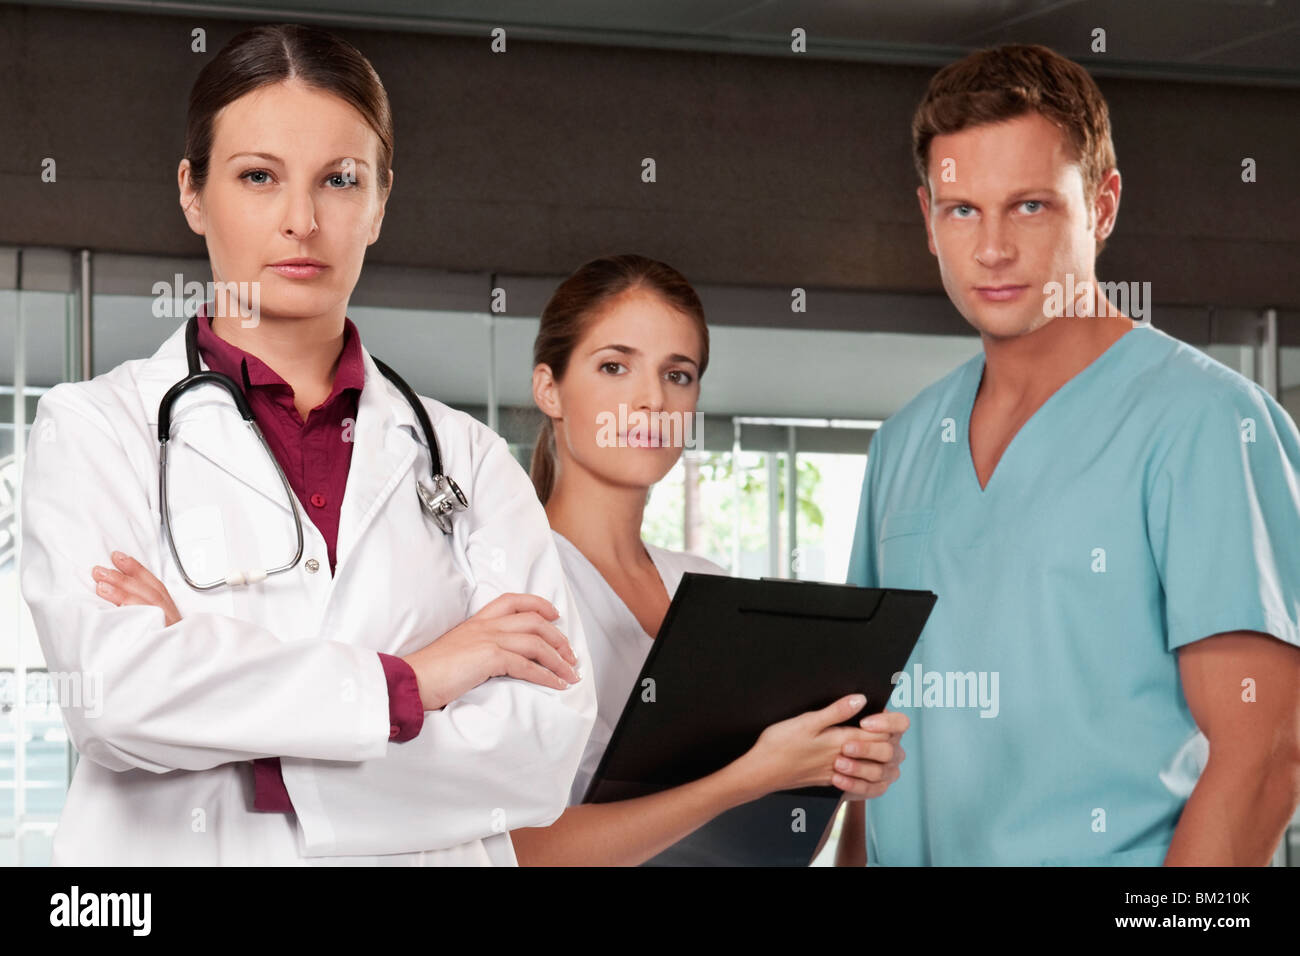 Three doctors standing together Stock Photo